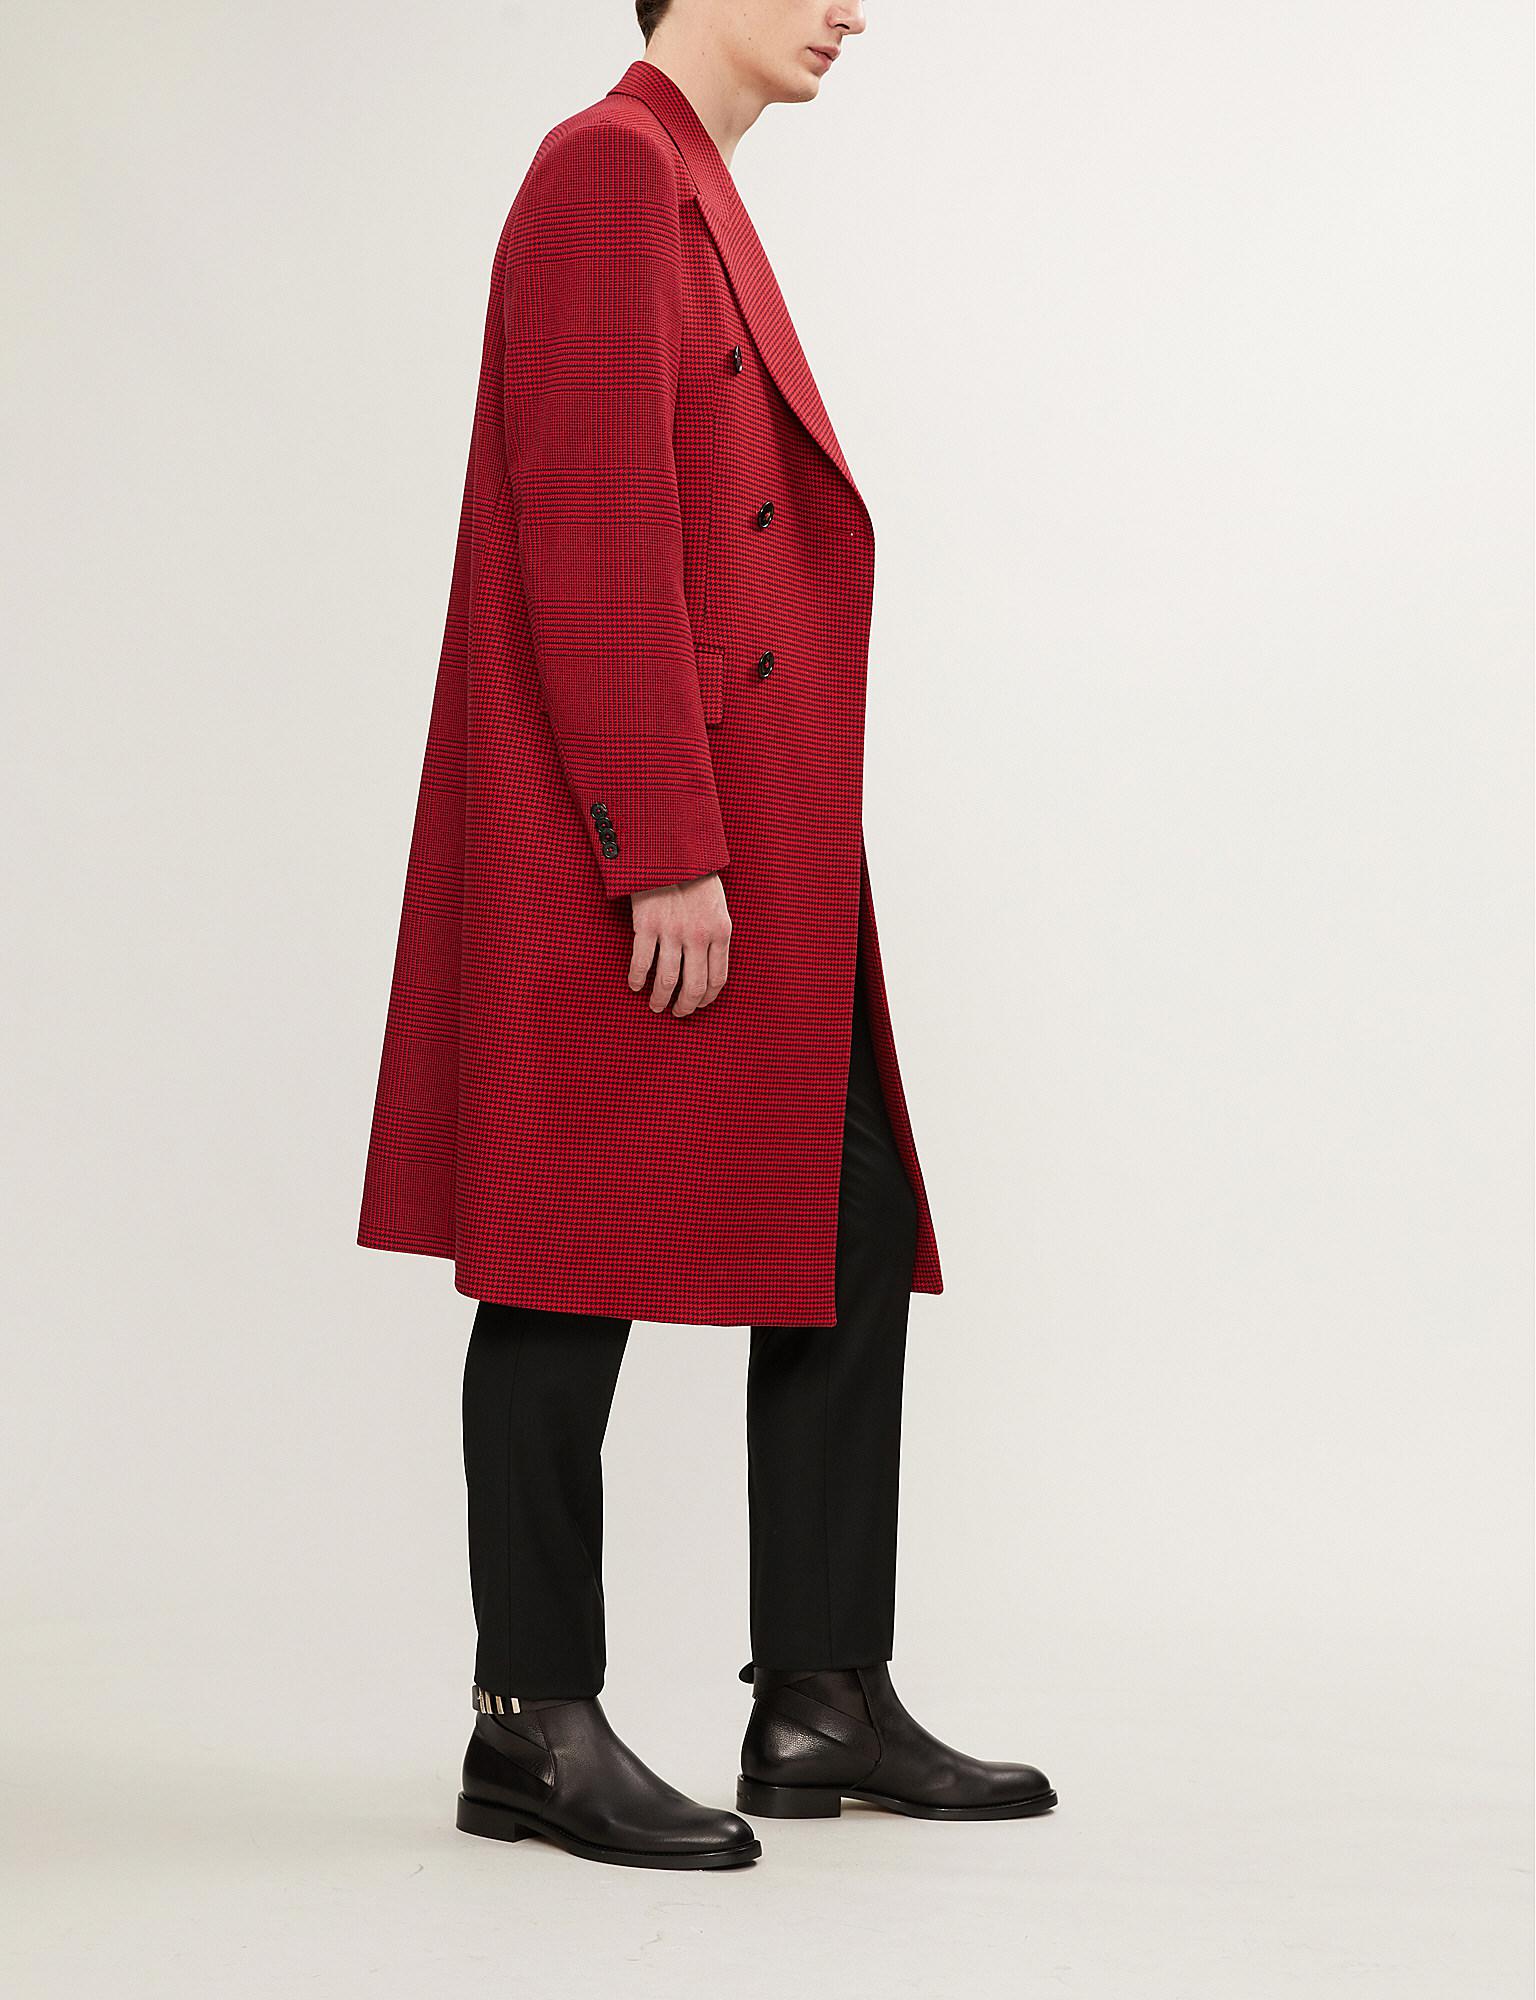 Lyst - Paul Smith Houndstooth Double-breasted Wool Coat in Red for Men